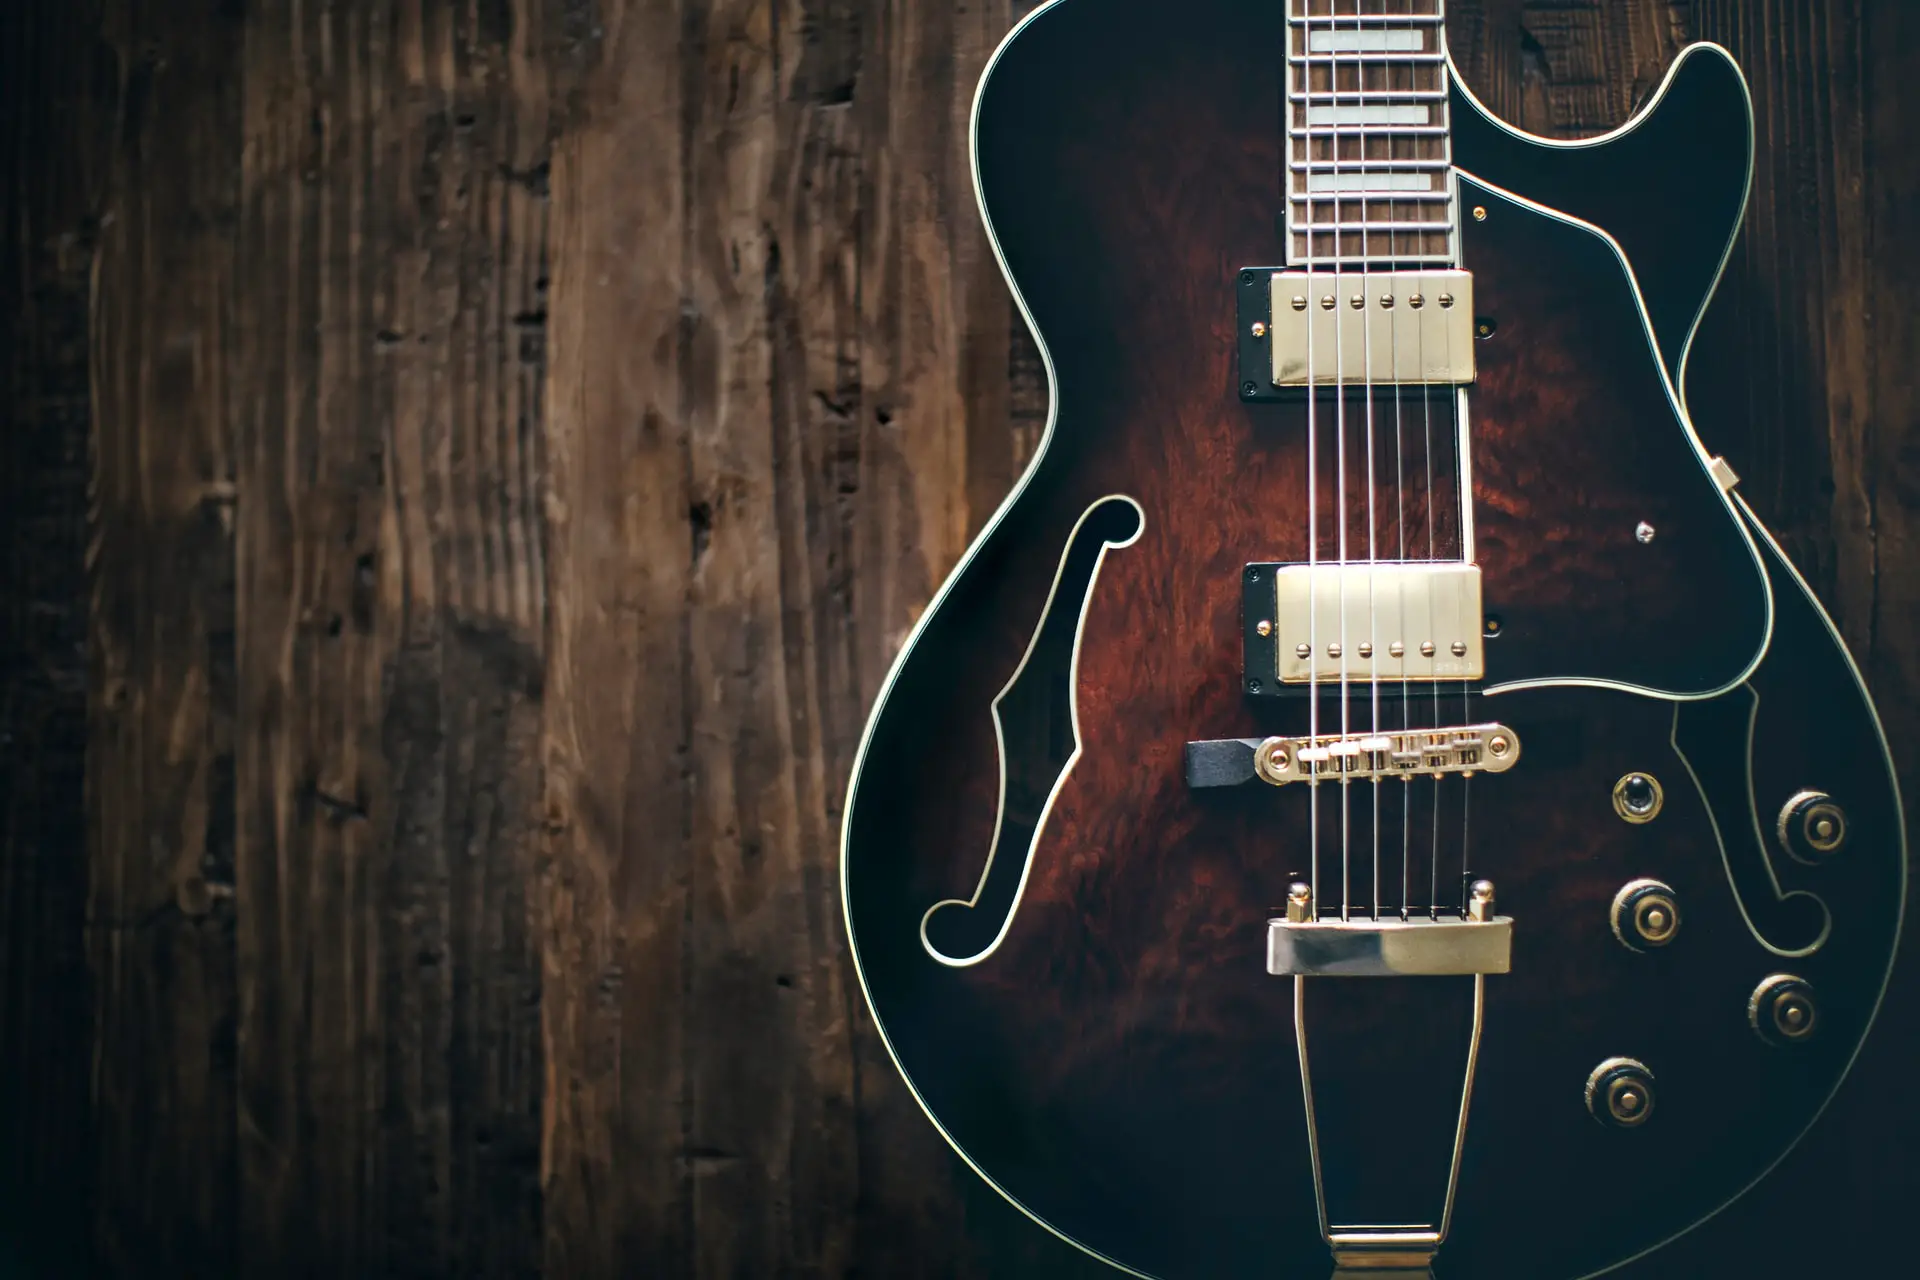 Hollow Body Guitar 101: Usage, Cost, Pros & Cons (Worth It?)